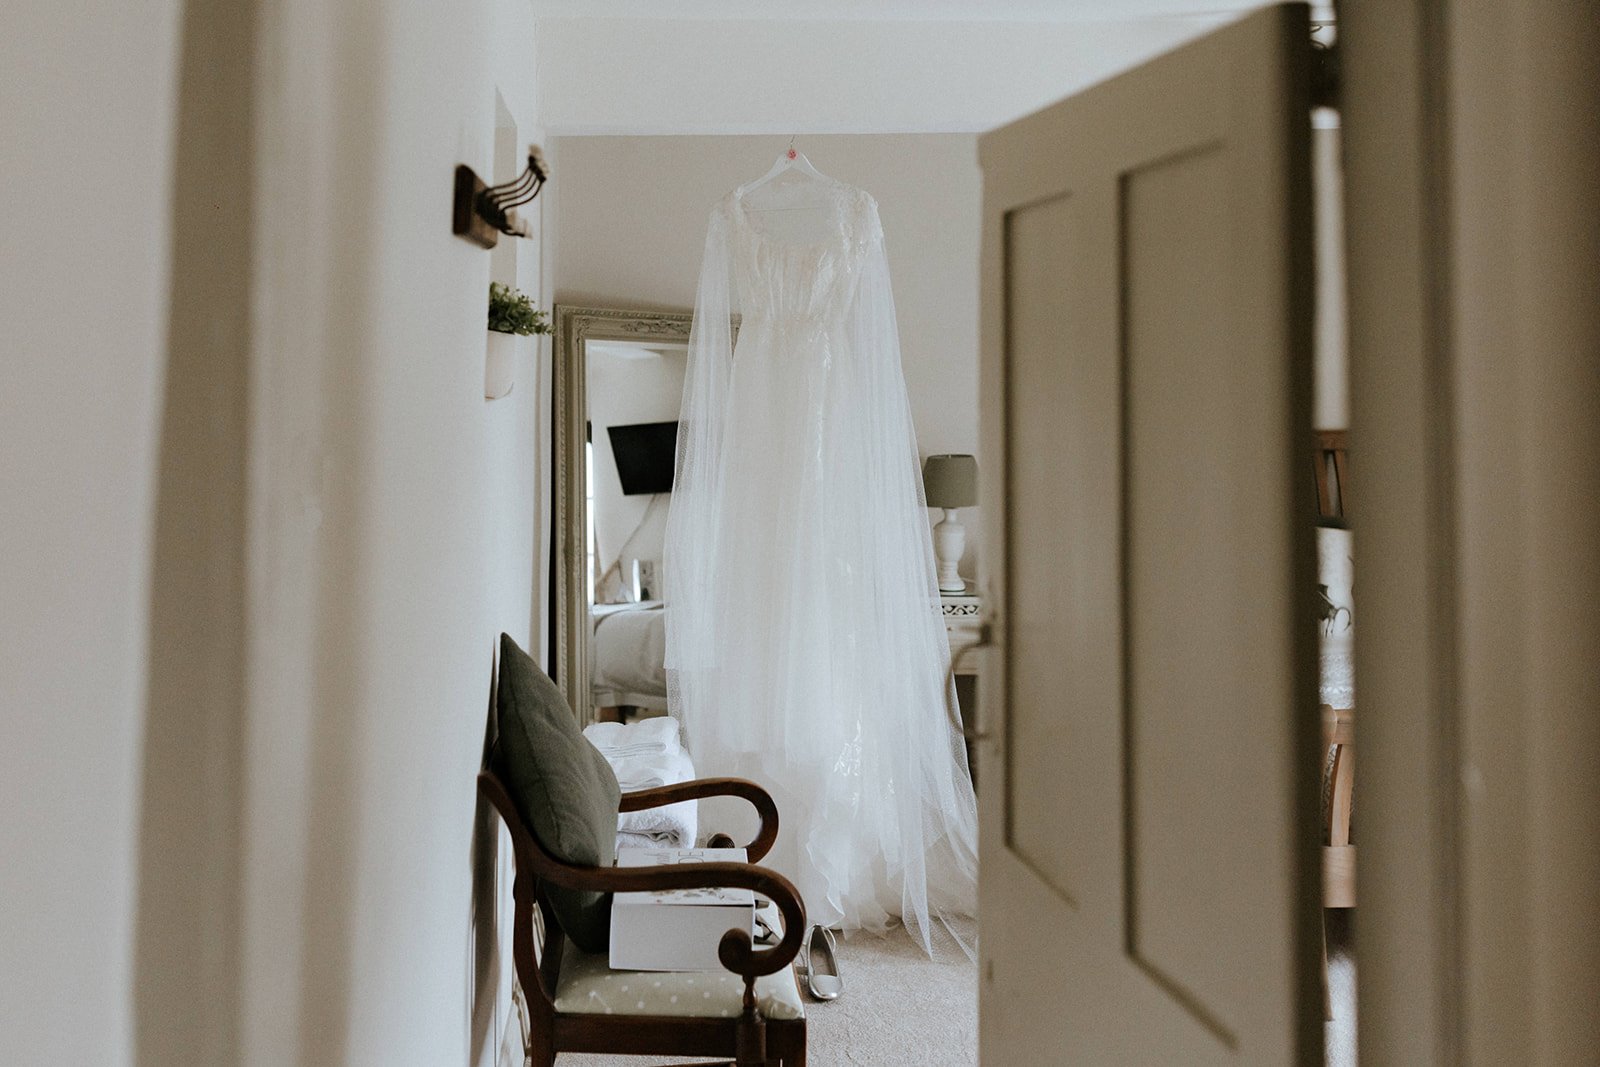 02_The wedding dress in The Normans wedding venue Cottage. Image by Monkeymole.jpg